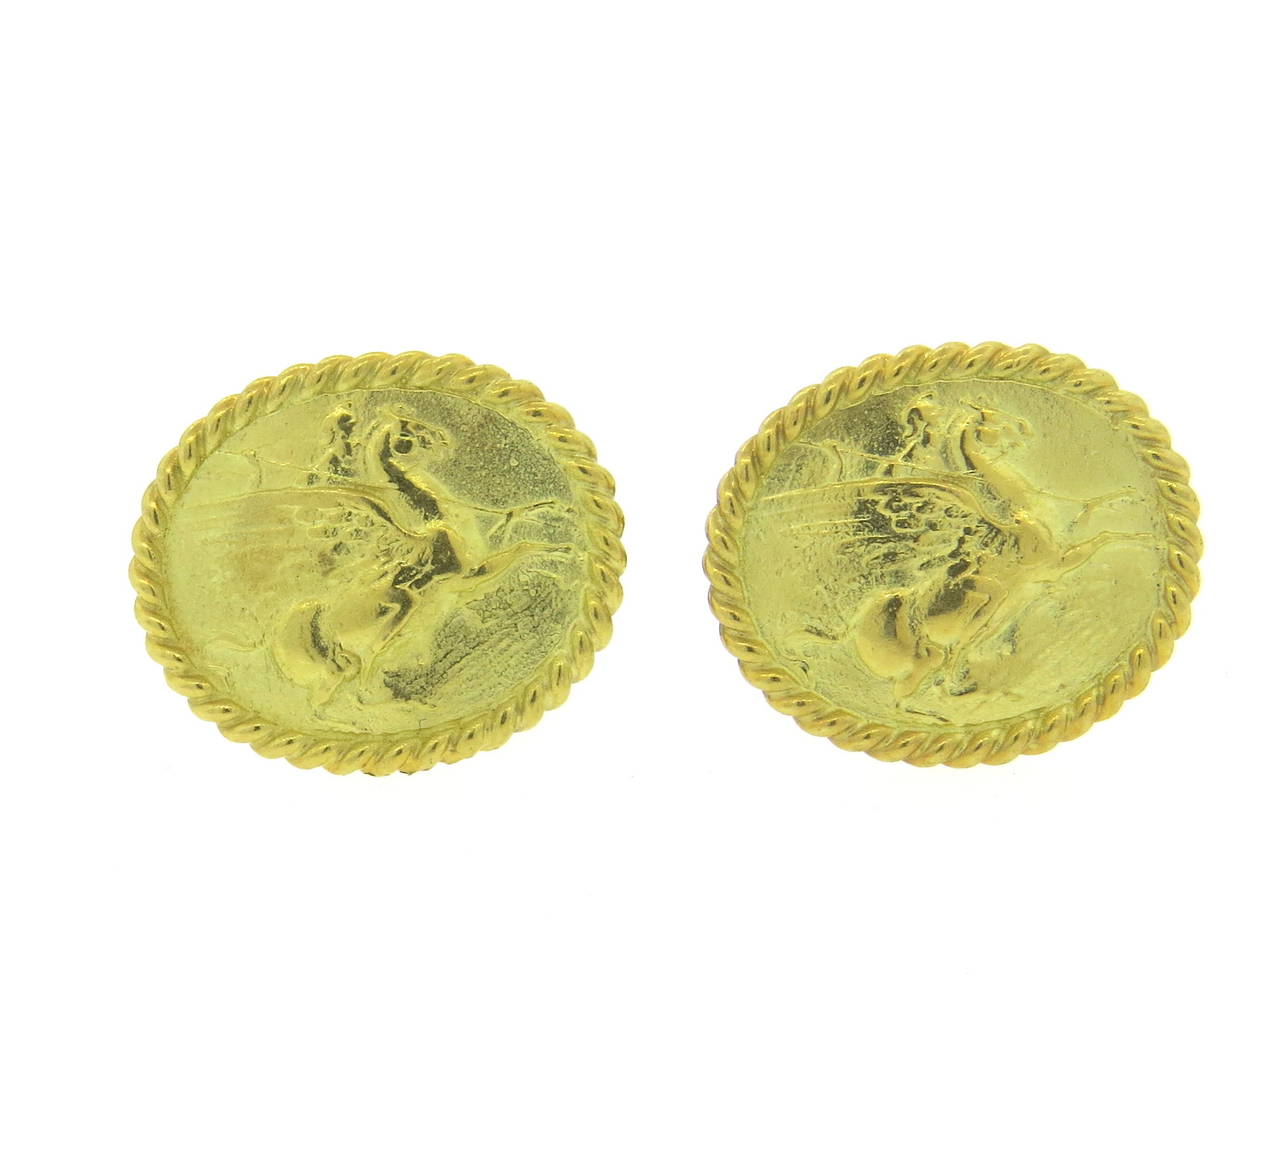 18k gold oval cufflinks by Seidengang from Athena collection, measuring 23mm x 20mm. Weight - 19 grams